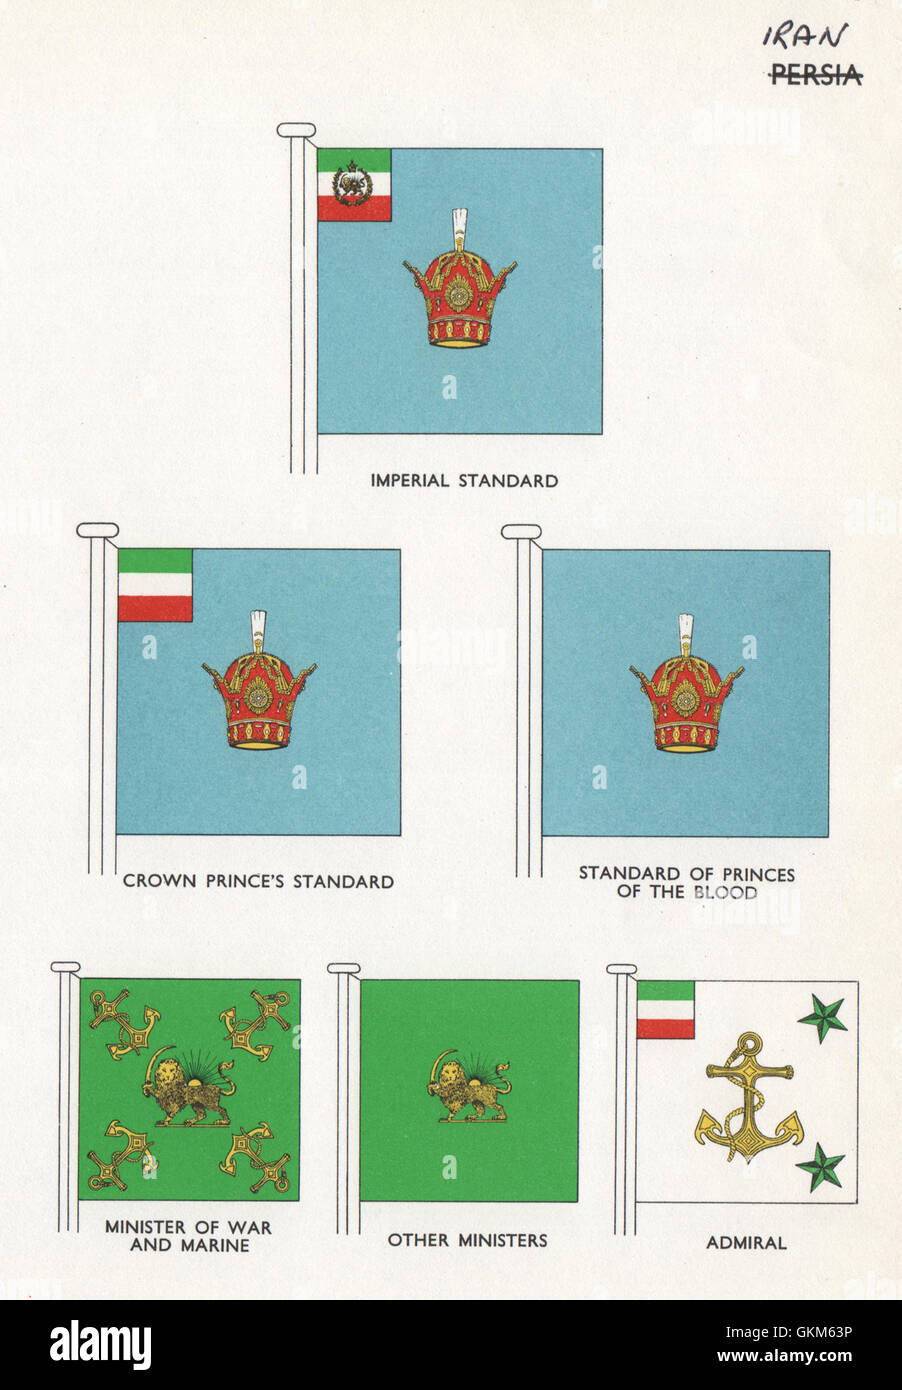 IRAN FLAGS. Imperial/Crown Prince's Standard of Princes of Blood. Ministers 1958 Stock Photo